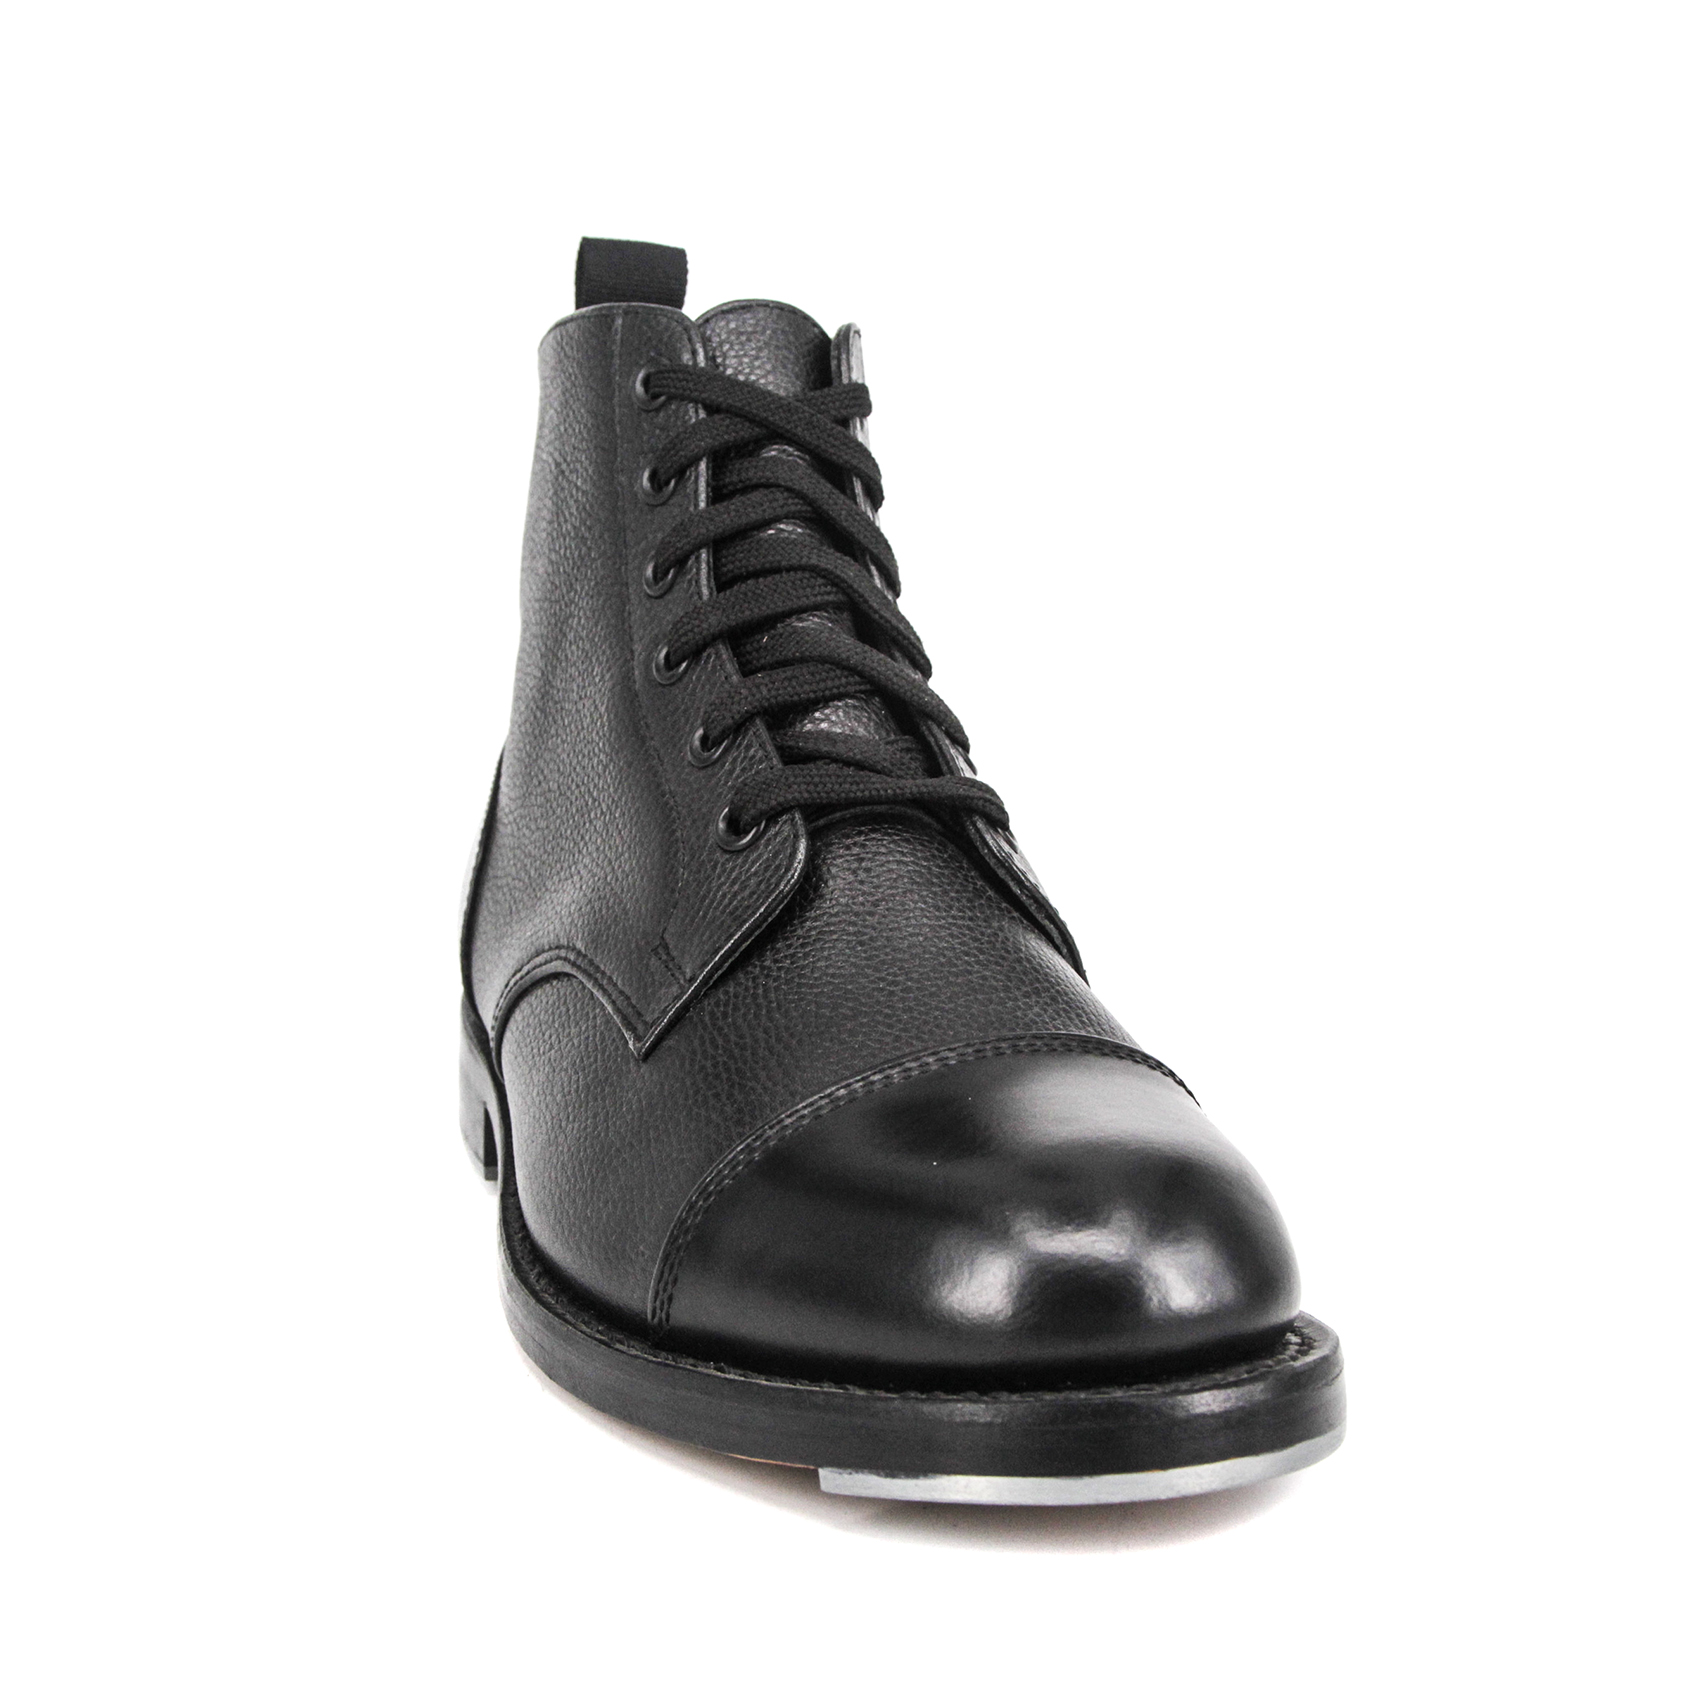 MILFORCE High Quality cheap Military police genuine leather shoes